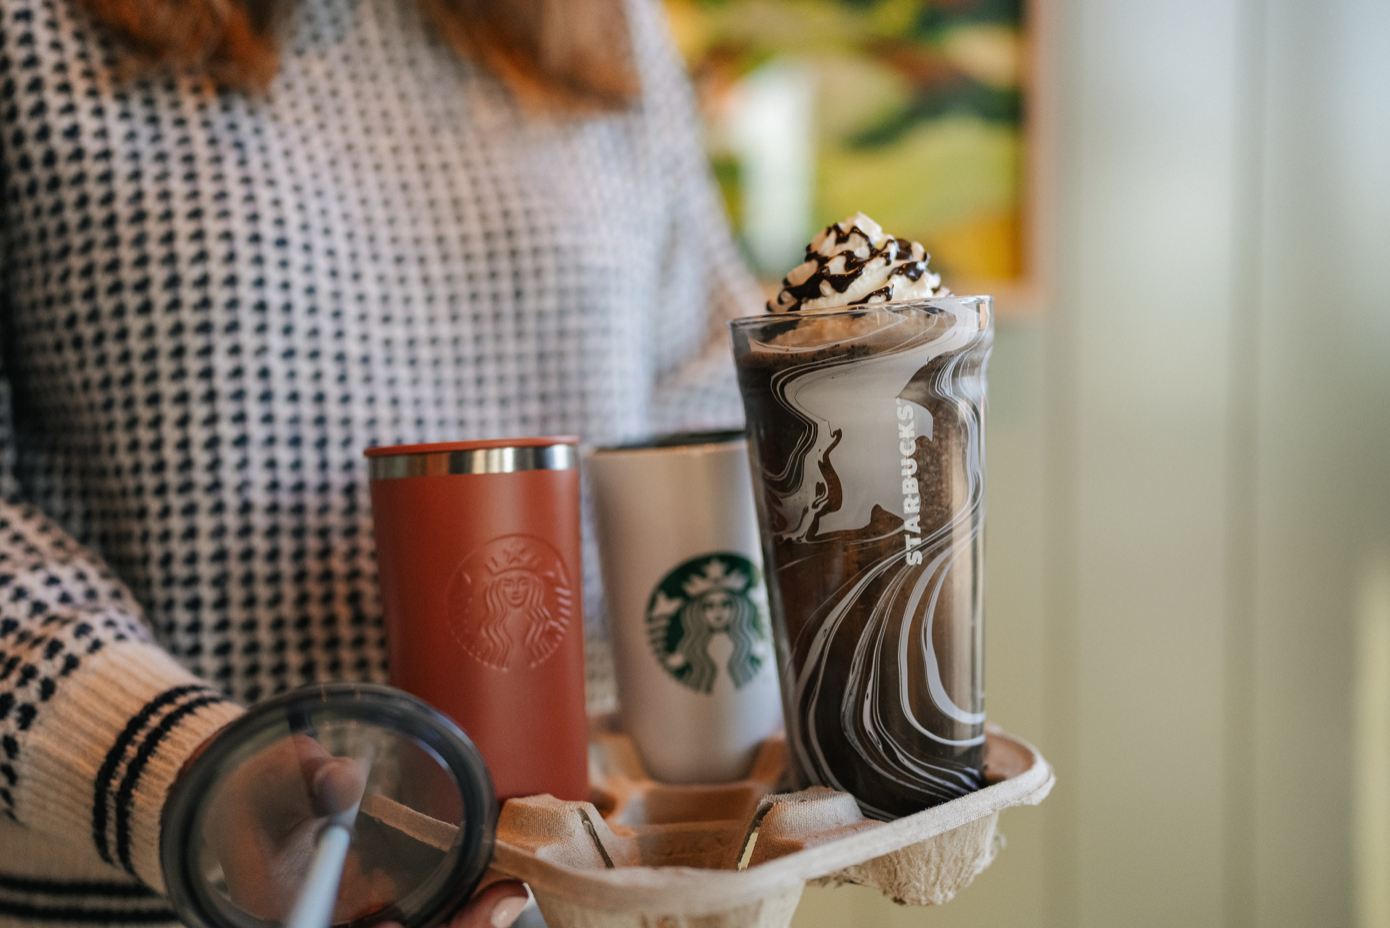 https://packagingsuppliersglobal.com/assets/uploads/Starbucks-Accept-Reusable-Cups-for-Drive-thru-and-Mobile-Orders-credit-Starbucks.png